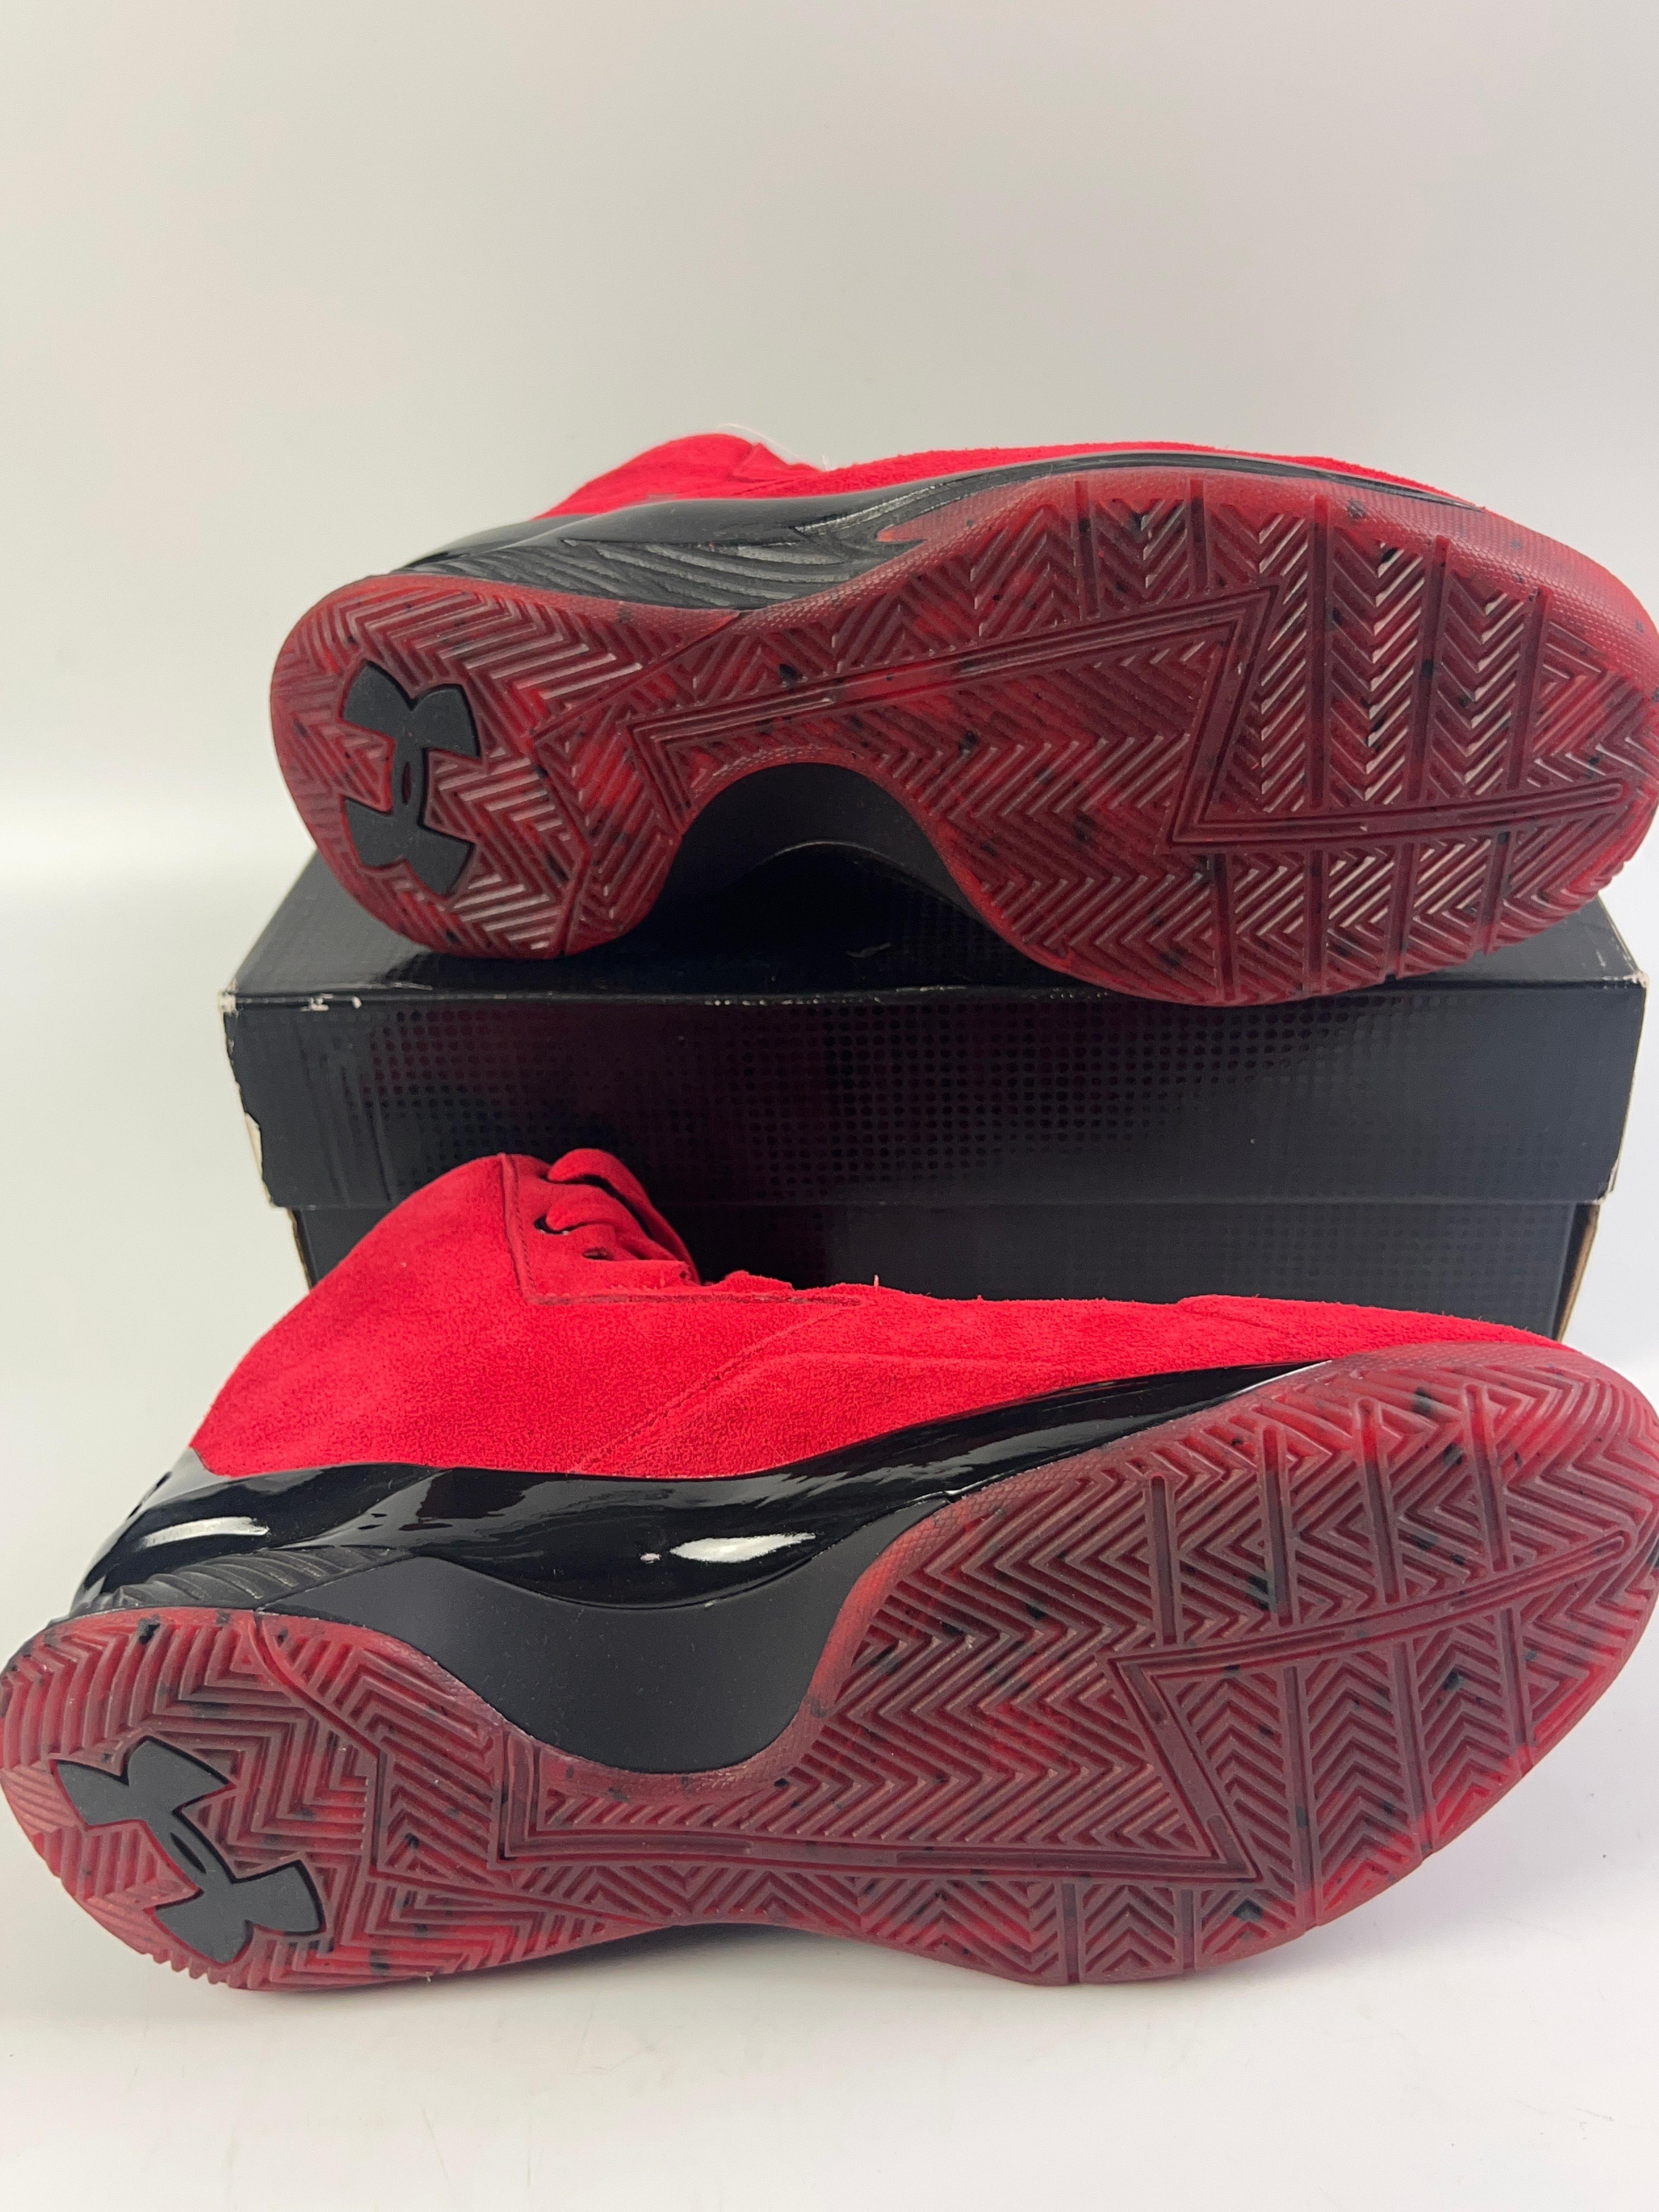 Alternate View 4 of Under Armour UA Curry 1 Lux Mid Red Suede Black 1296617-600 Size